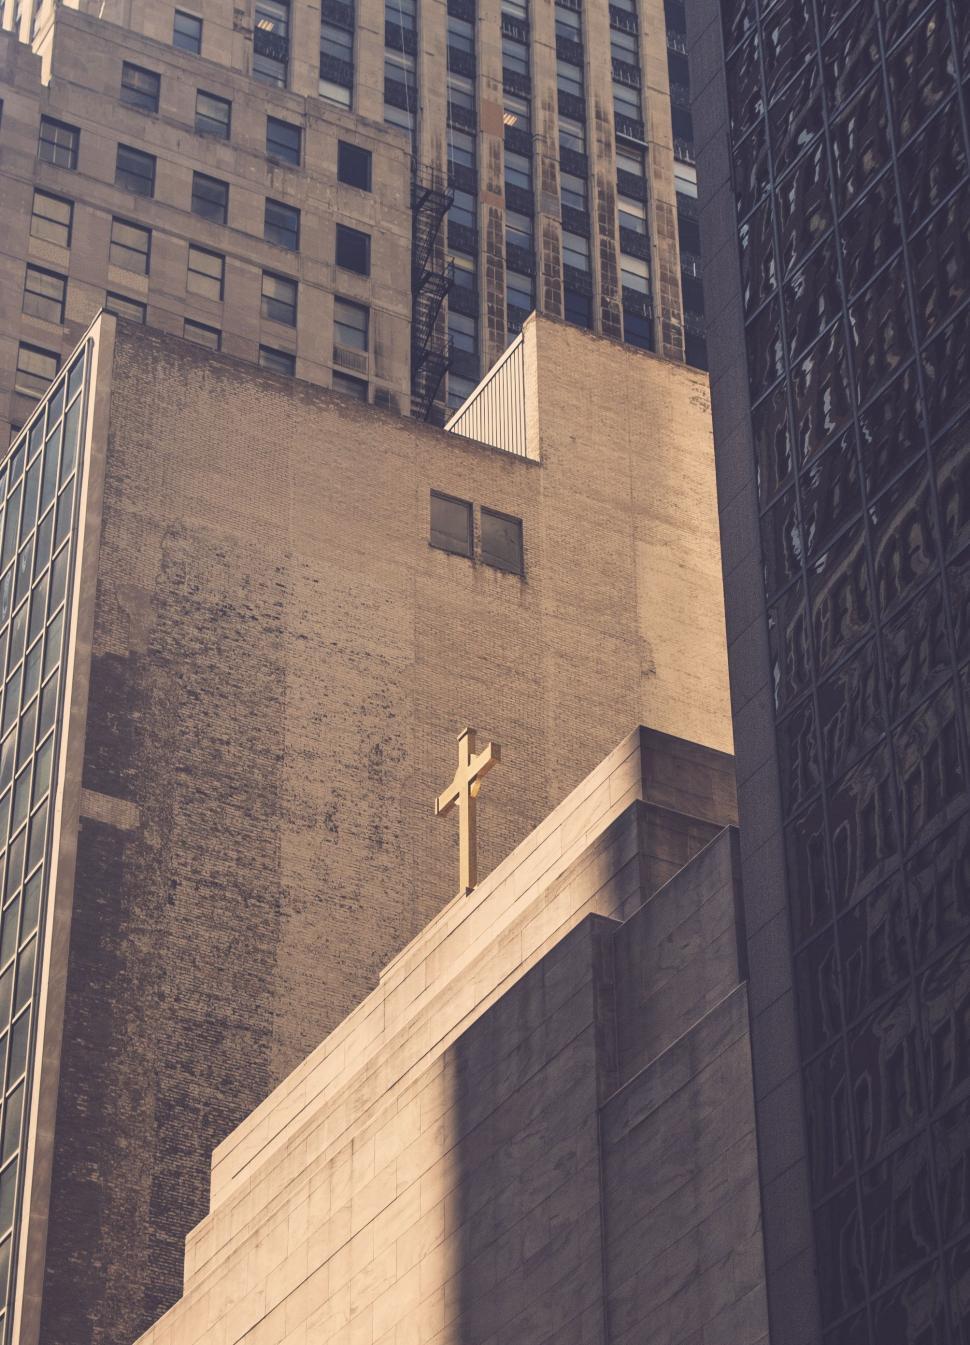 Free Image of Tall Building With Cross on Top 